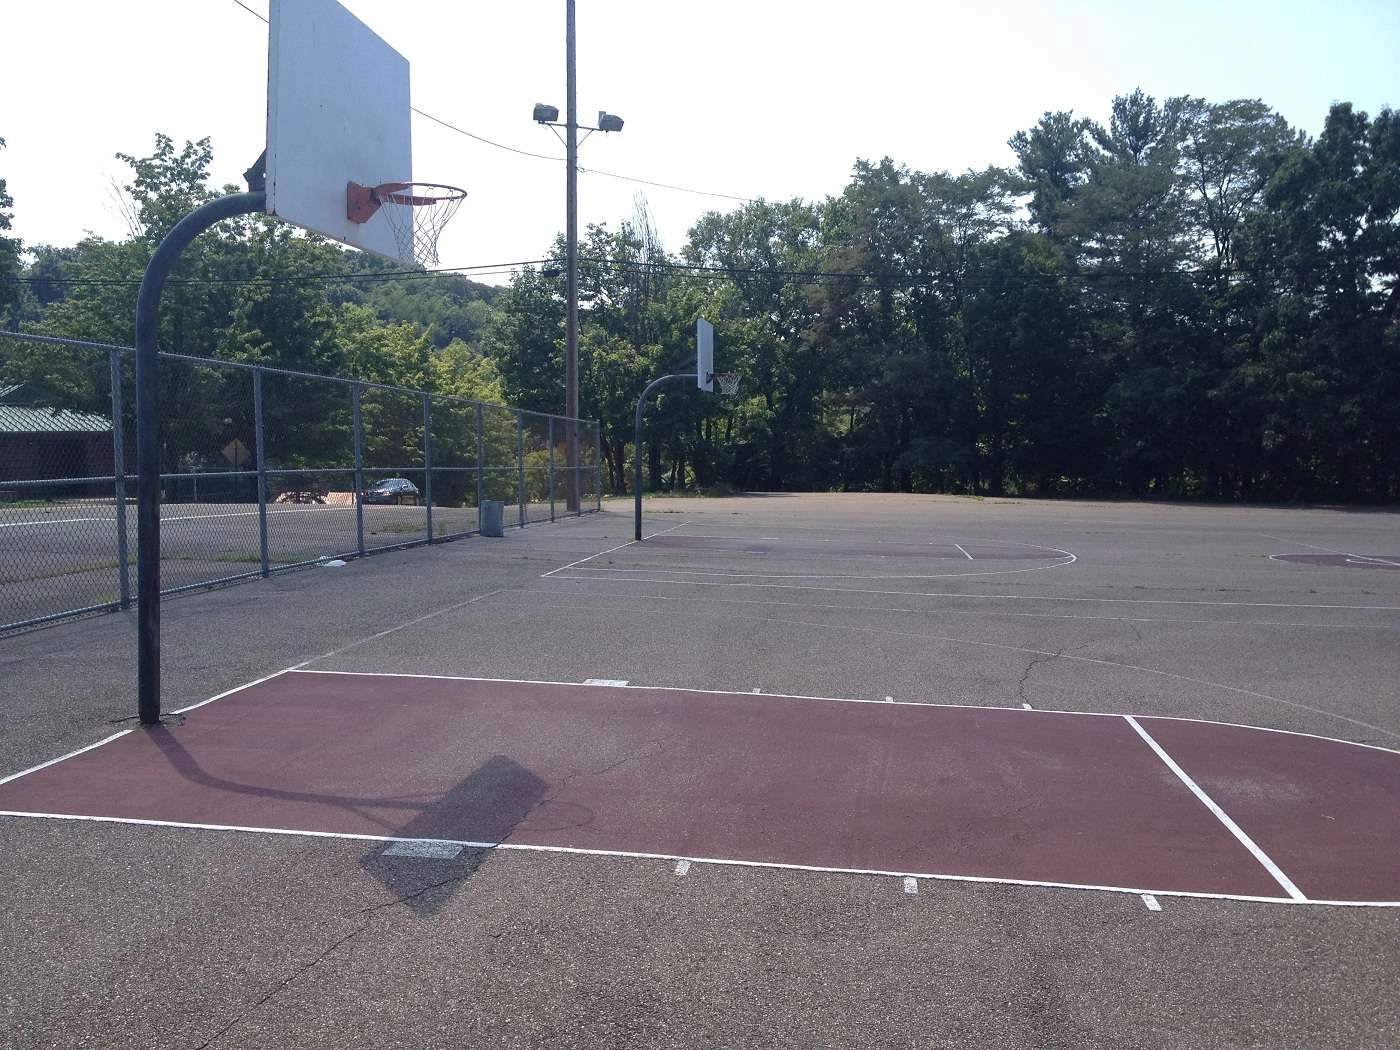 South Park Township, PA Basketball Court: South Park Basketball Courts - Courts of the World